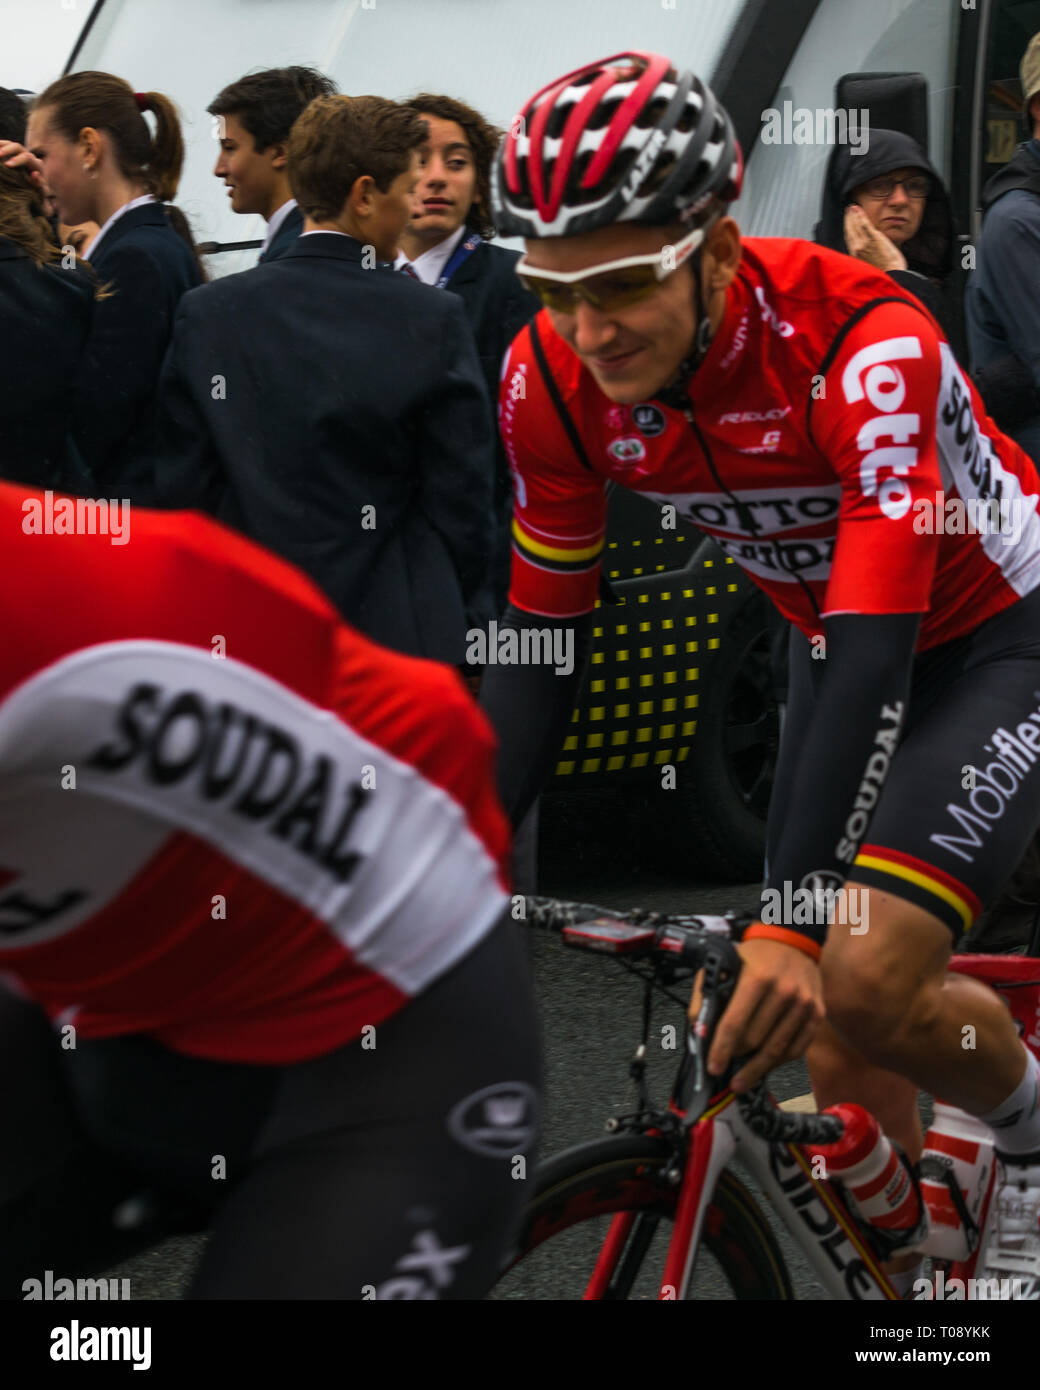 A Lotto Soudal rider prior to stage 6 (Sidmouth to Haytor) of the 2016 Tour of Britain in Sidmouth, East Devon, South West England, UK. Stock Photo